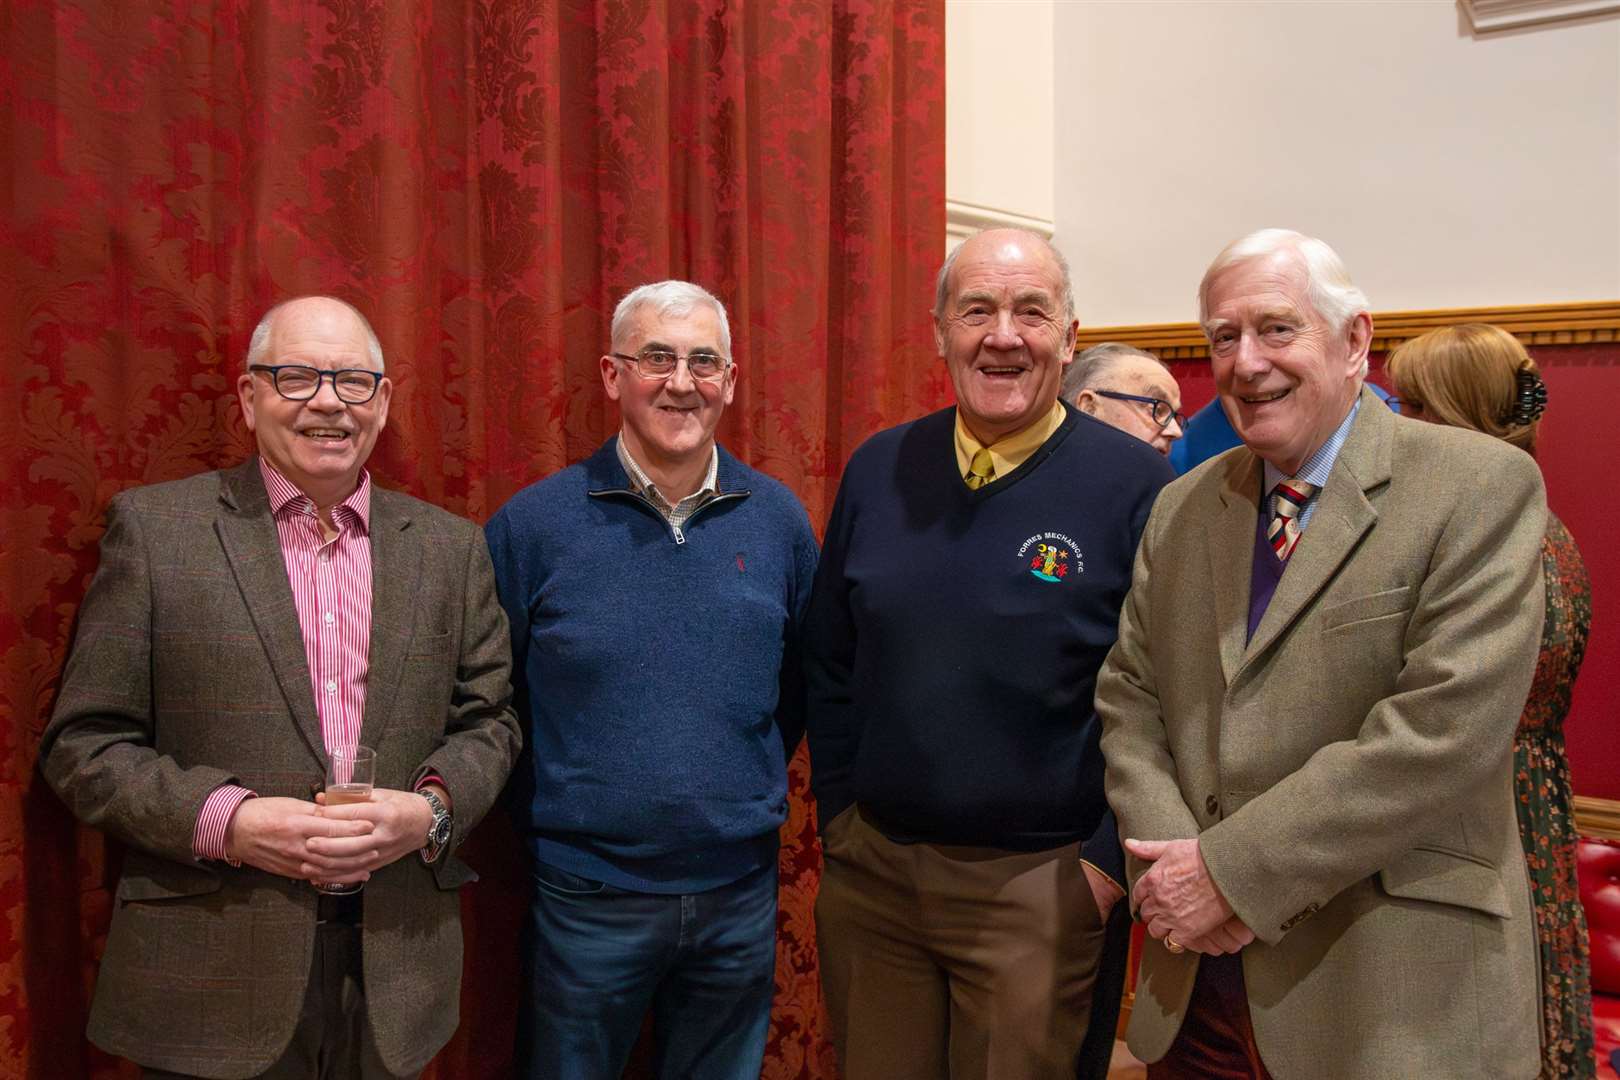 AJ Engineering managing director Alan James, local butcher and Forres Community Trust treasurer Graham Murdoch, and Forres Heritage trust chairman George Alexander at the Tolbooth event.